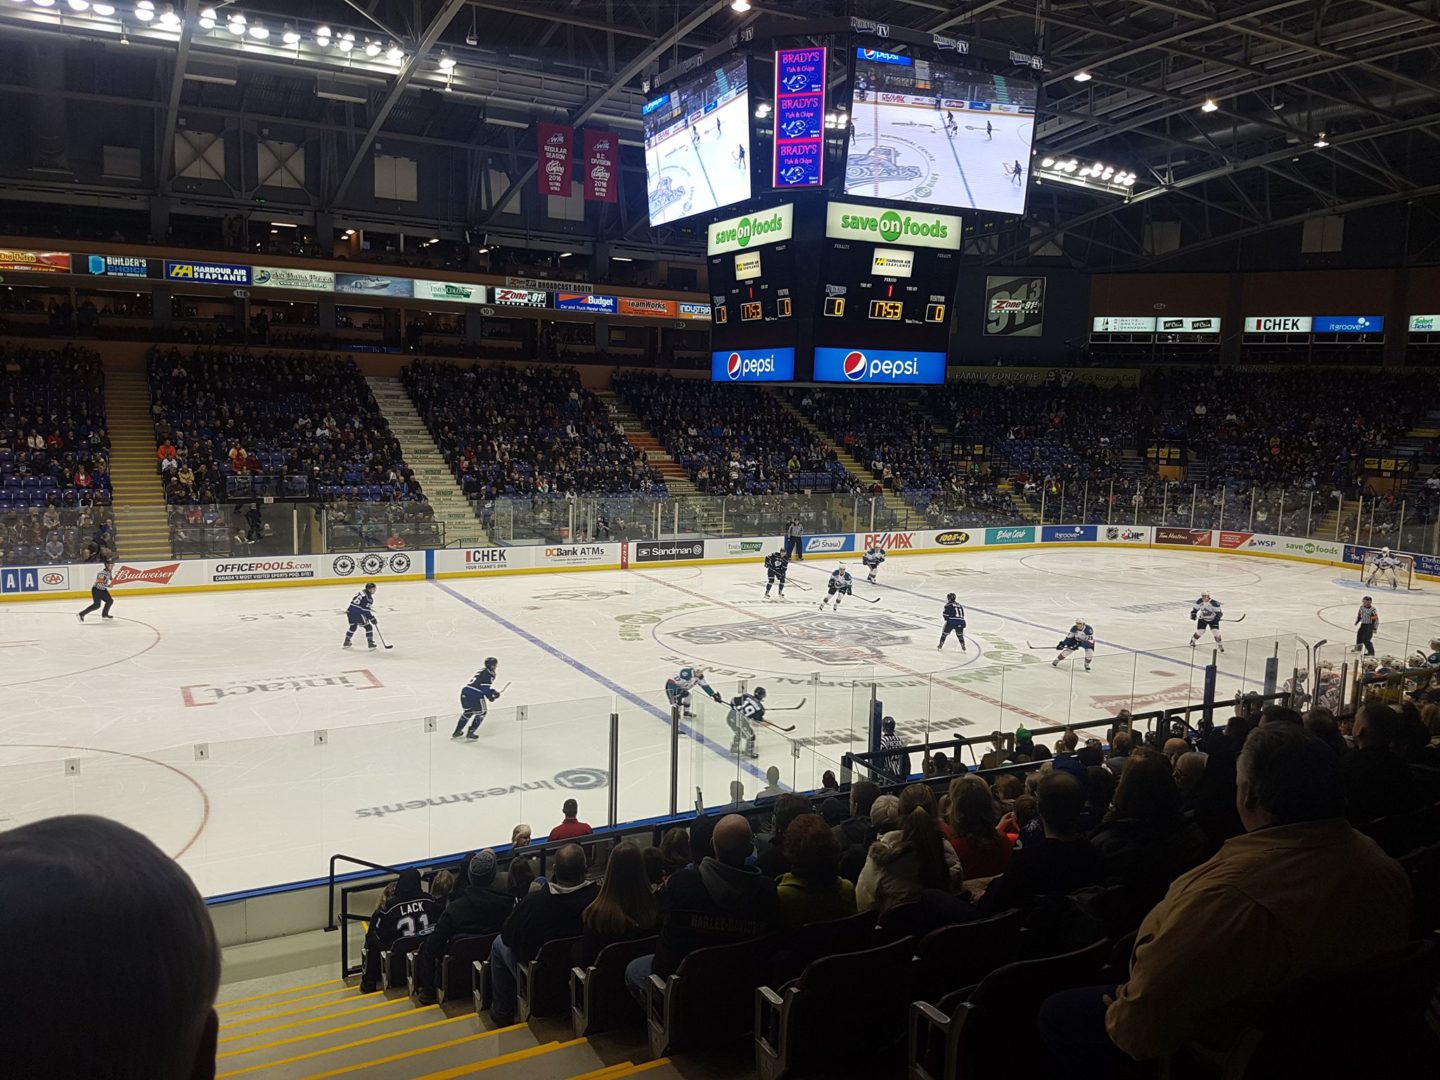 Victoria Royals ECO Night 2017 an electrifying success!